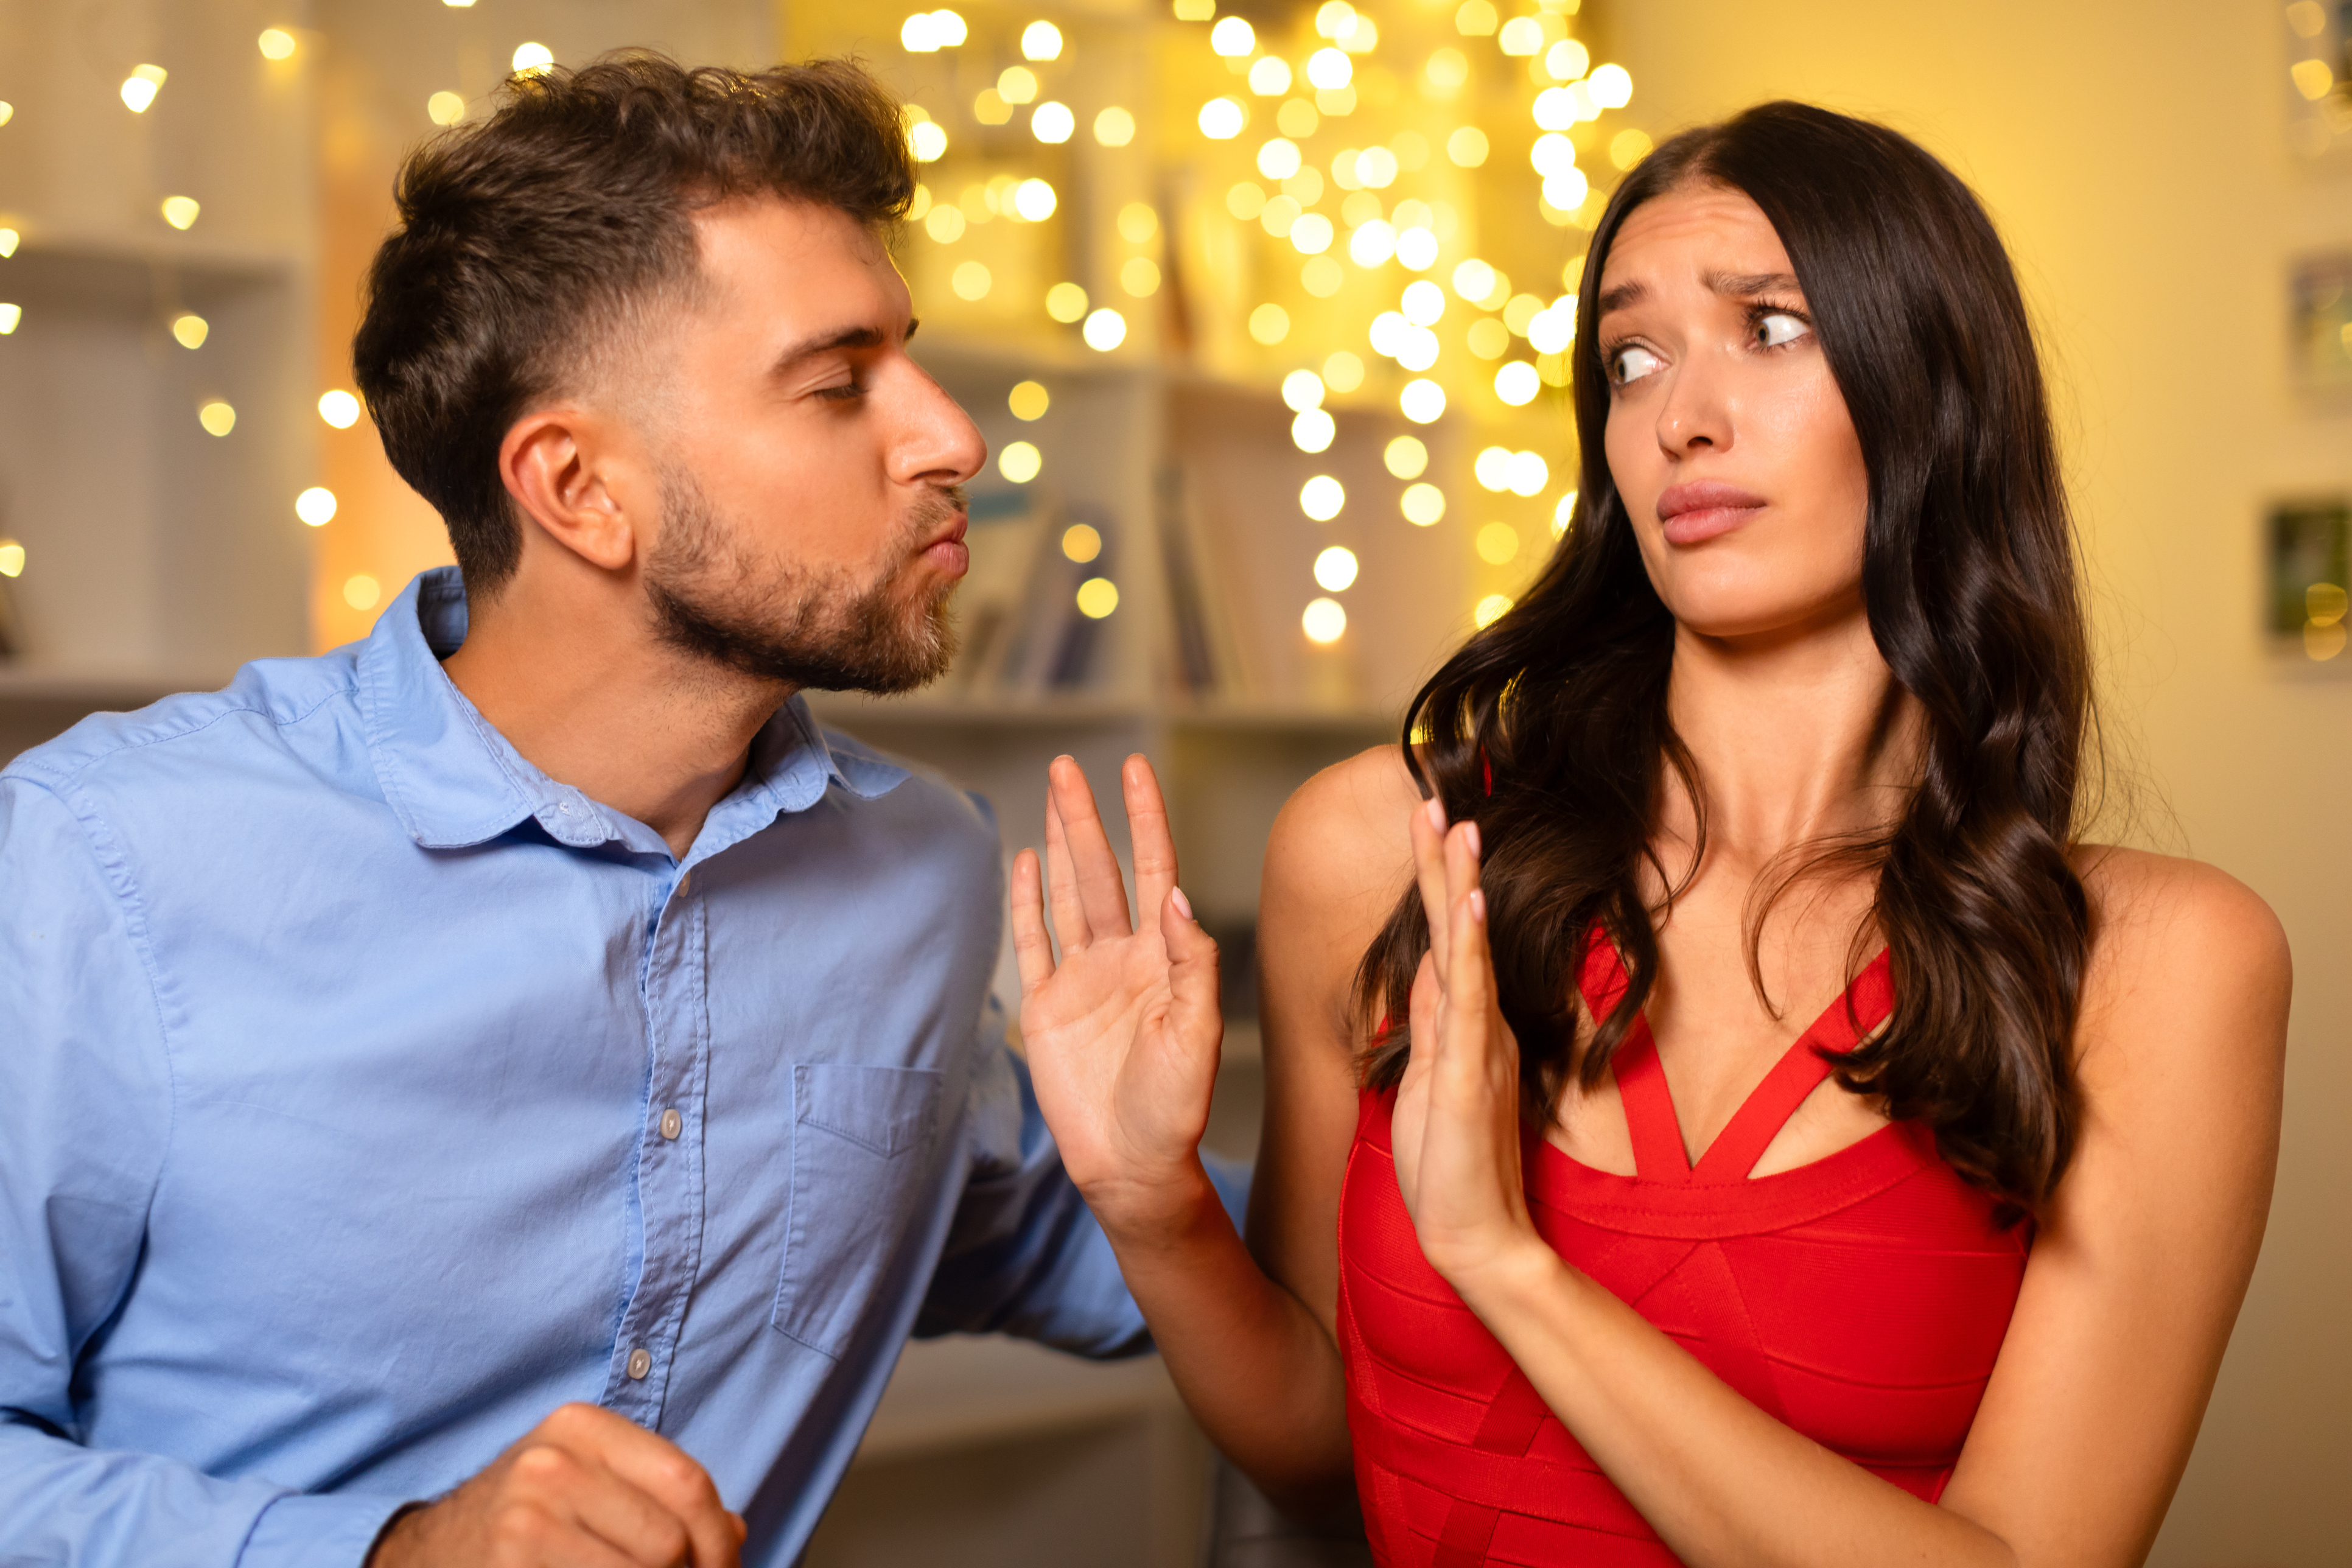 Are Women More Pickier Than Men When It Comes To Dating Preferences Or Are Men?